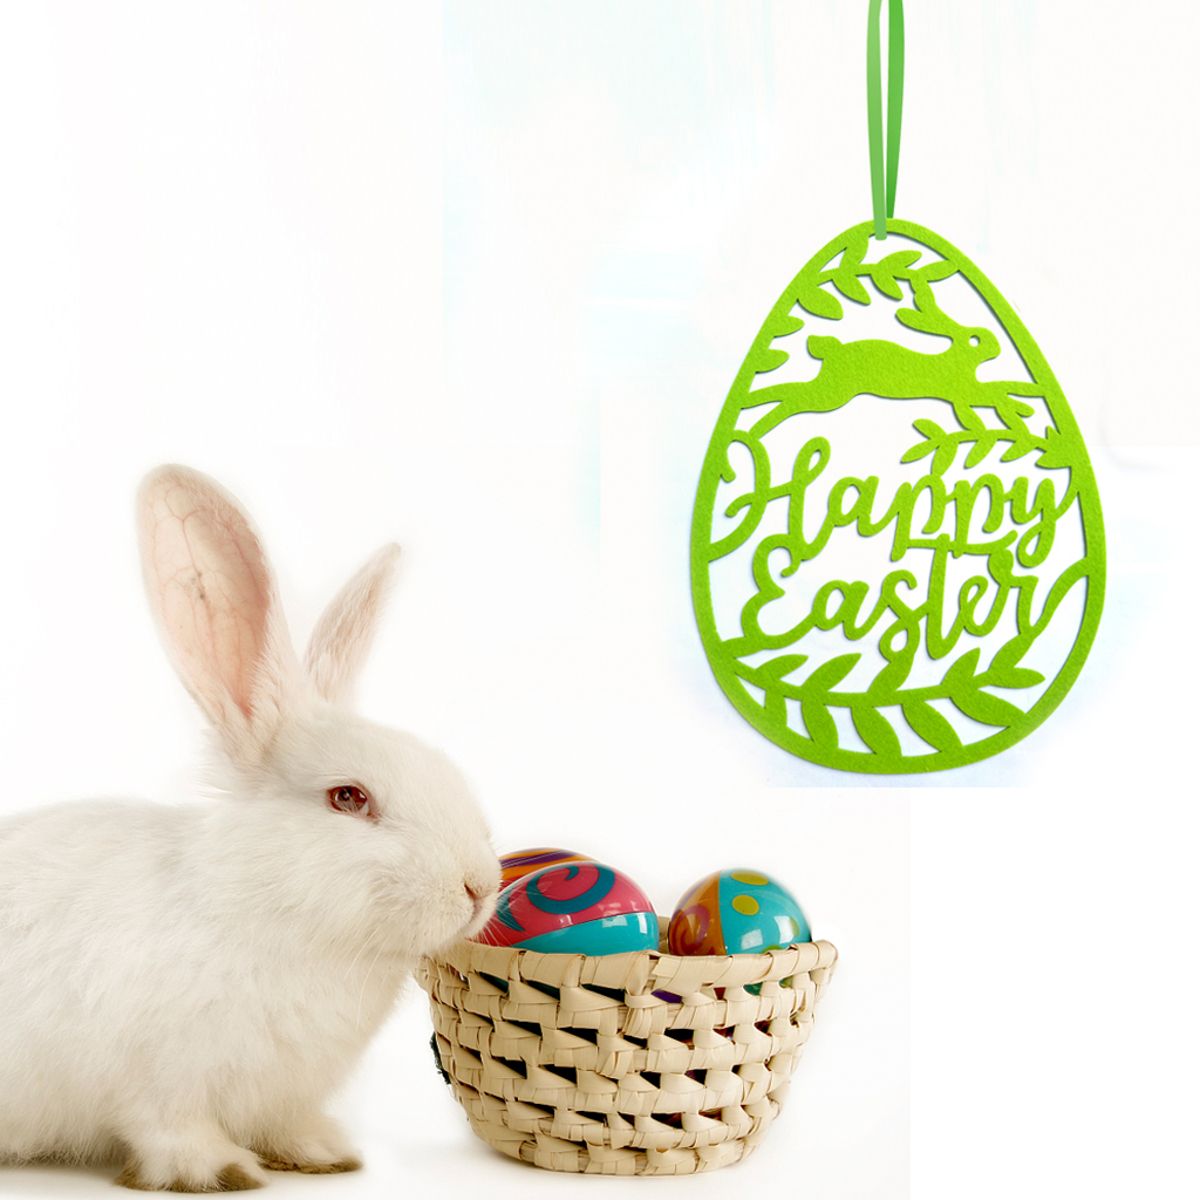 Hanging-Ornament-Easter-Eggs-Bunny-Pendant-Egg-Shape-Gifts-Wall-Door-Decorations-1446290